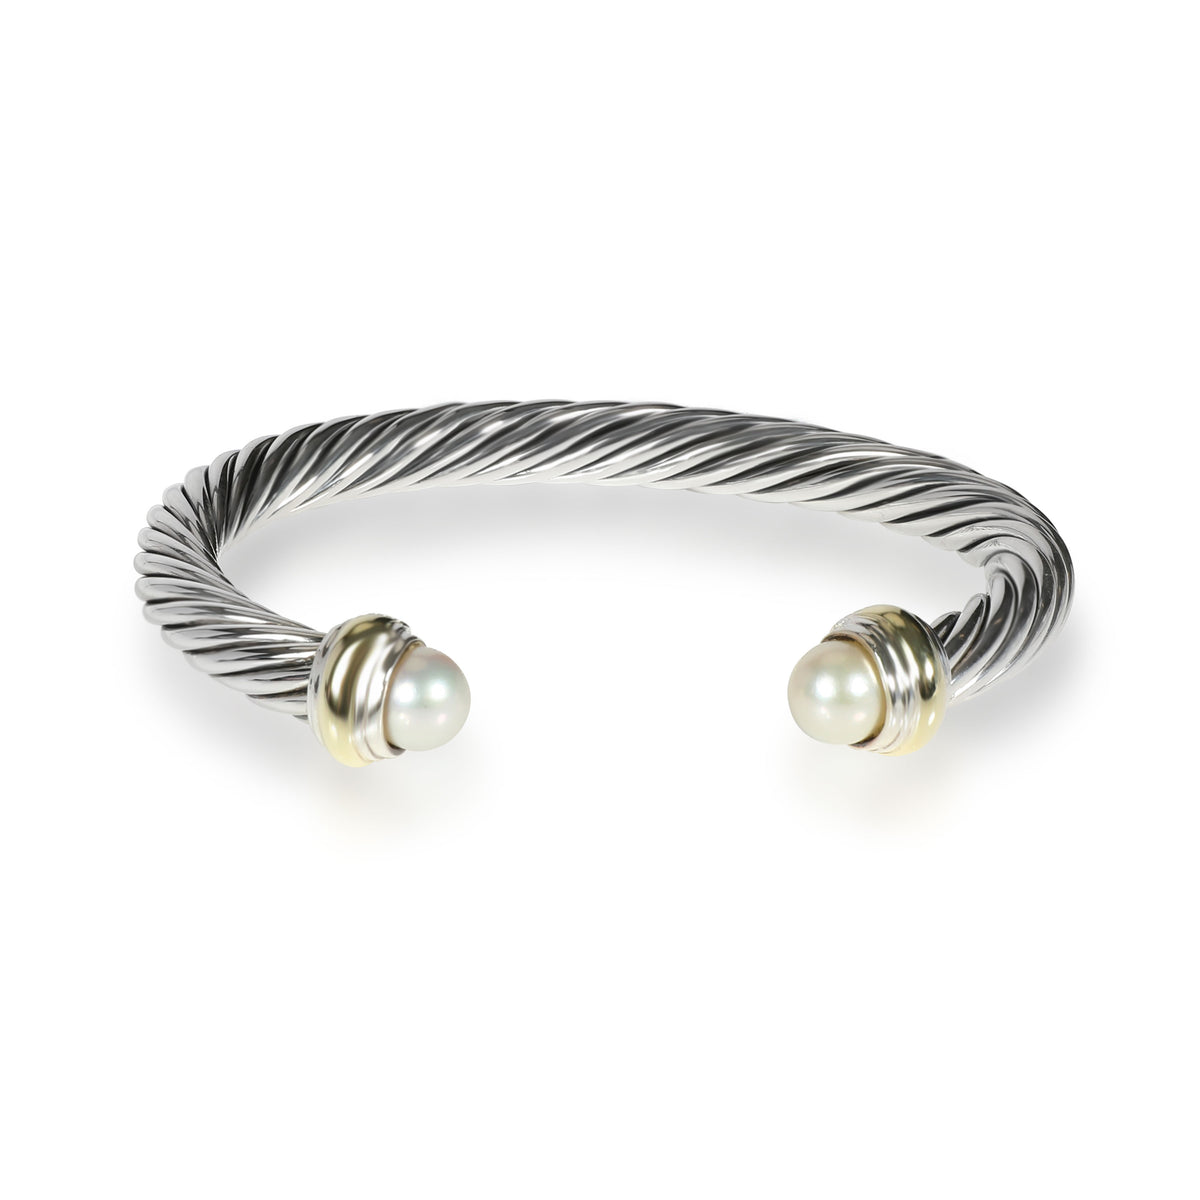 David Yurman Cable Bracelet with Pearls in 14K Yellow Gold/Sterling Silver